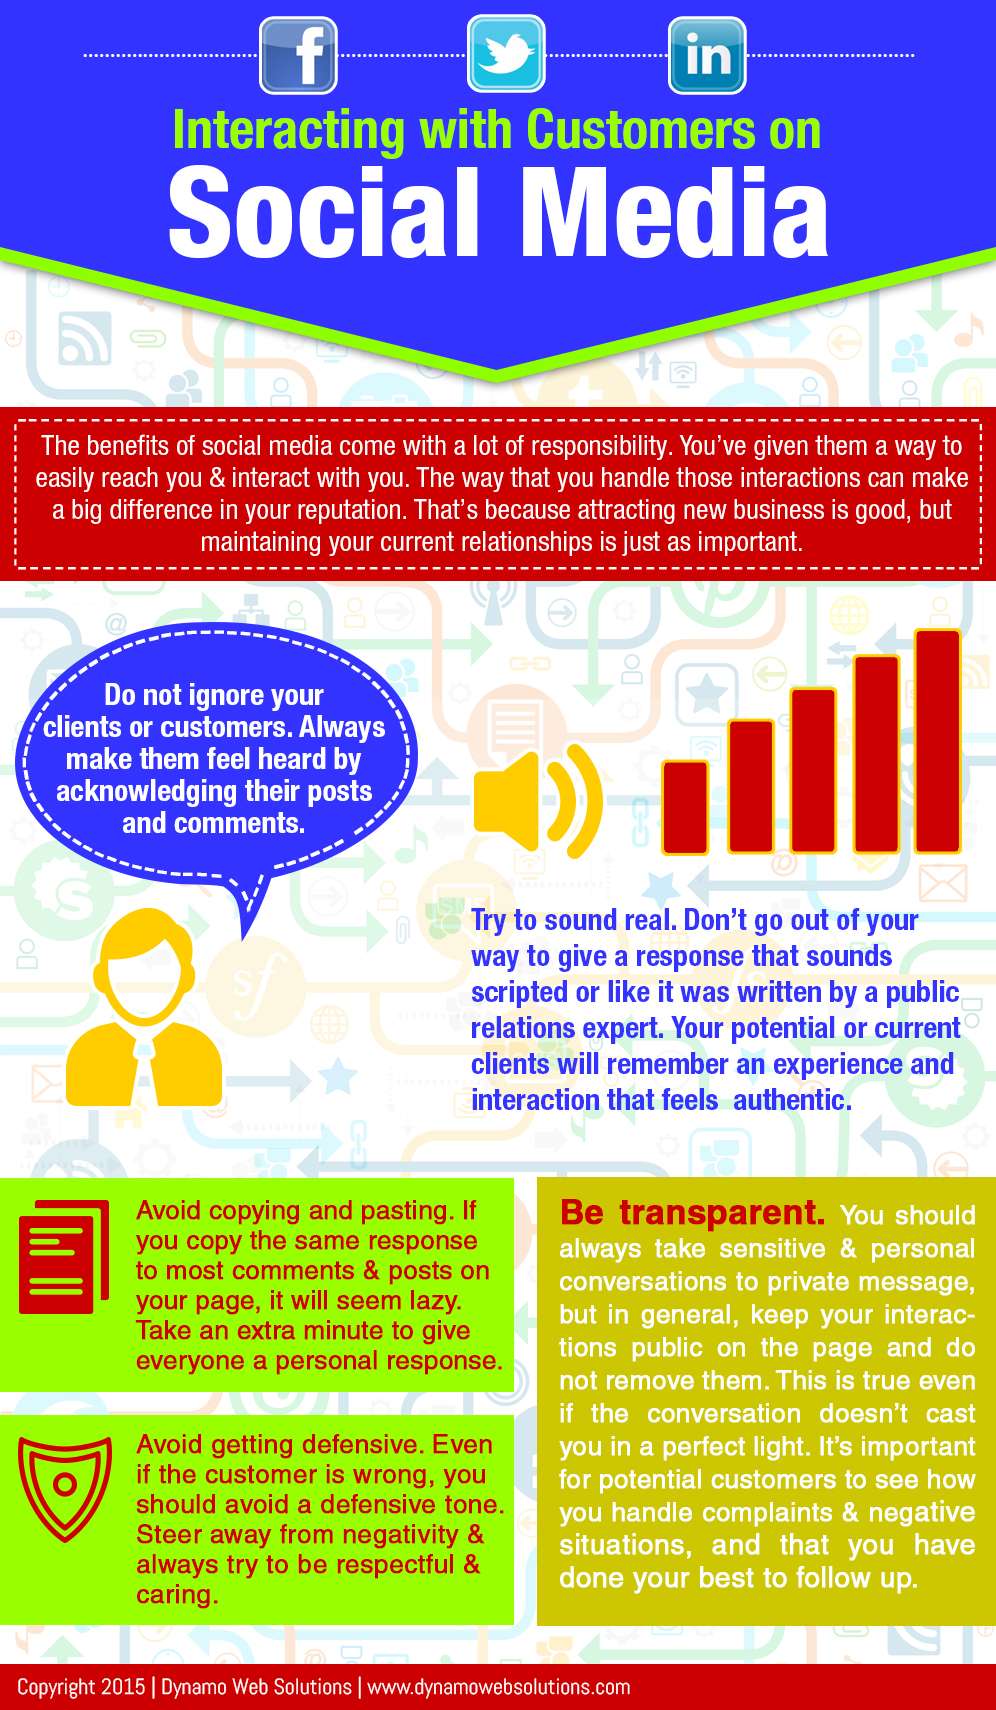 Interacting with Customers on Social Media by dynamo web solution - Infographics